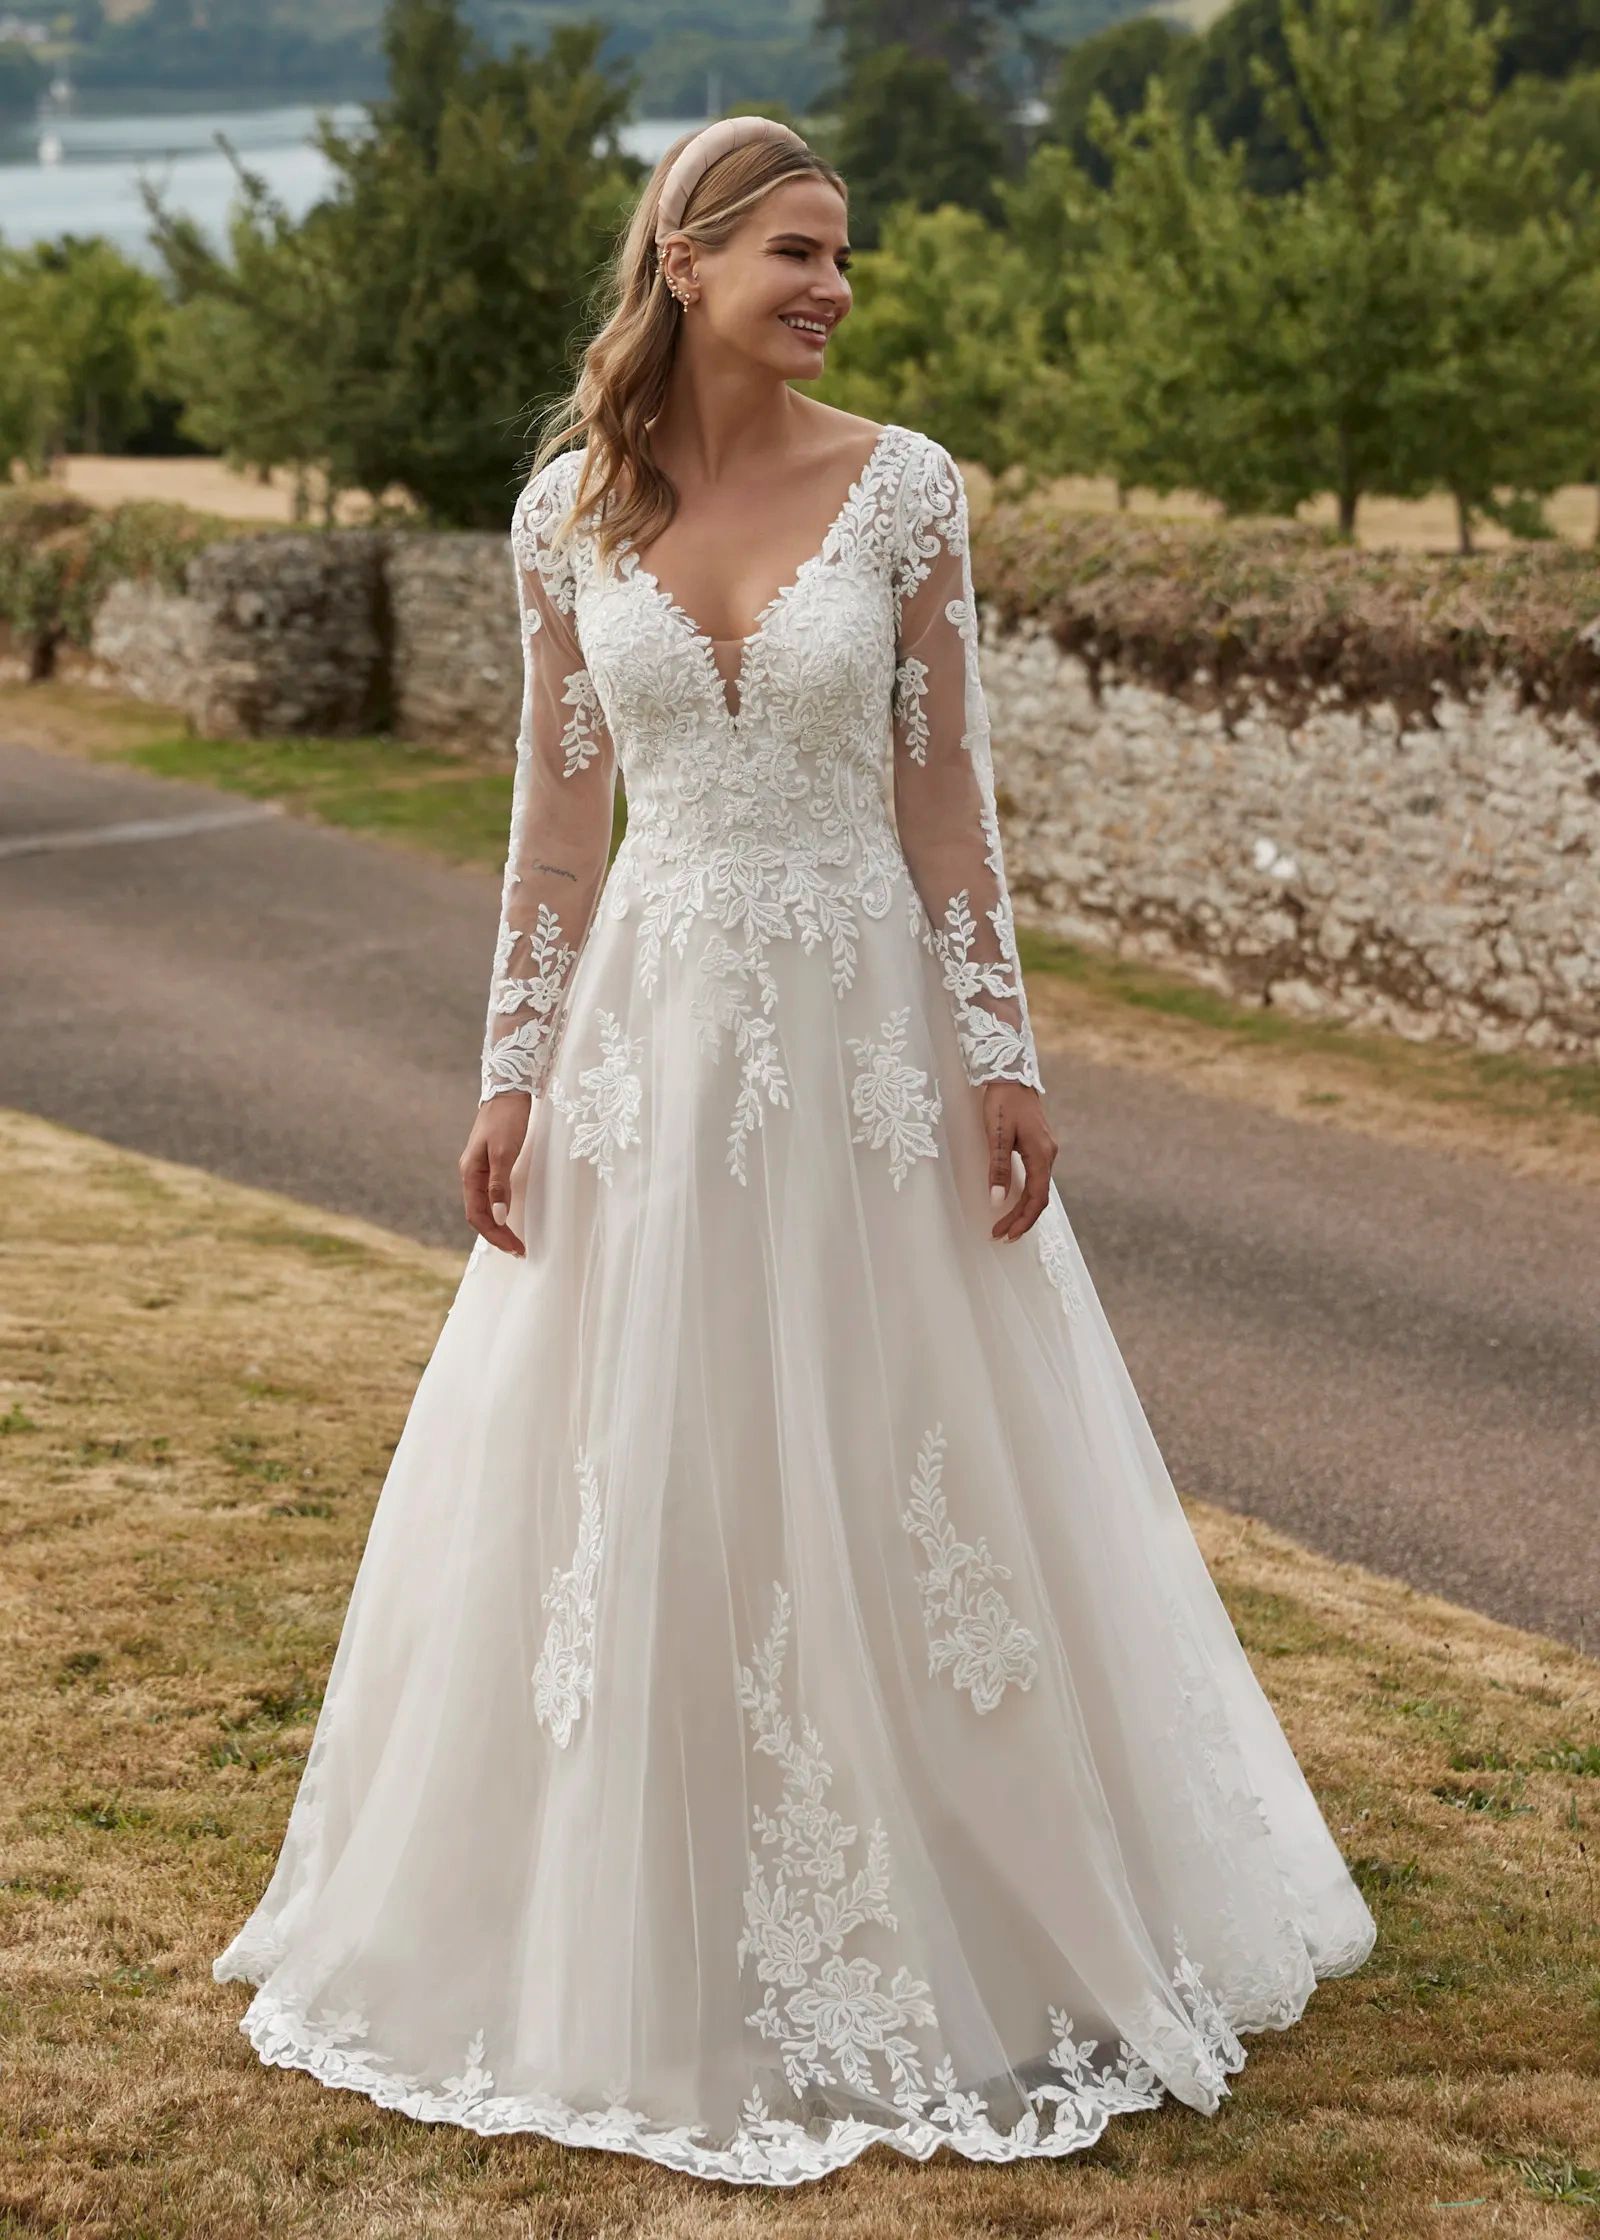 JW220932
A superb A-line silhouette dress with a plunging neckline and illusion sleeves. Shown in Al